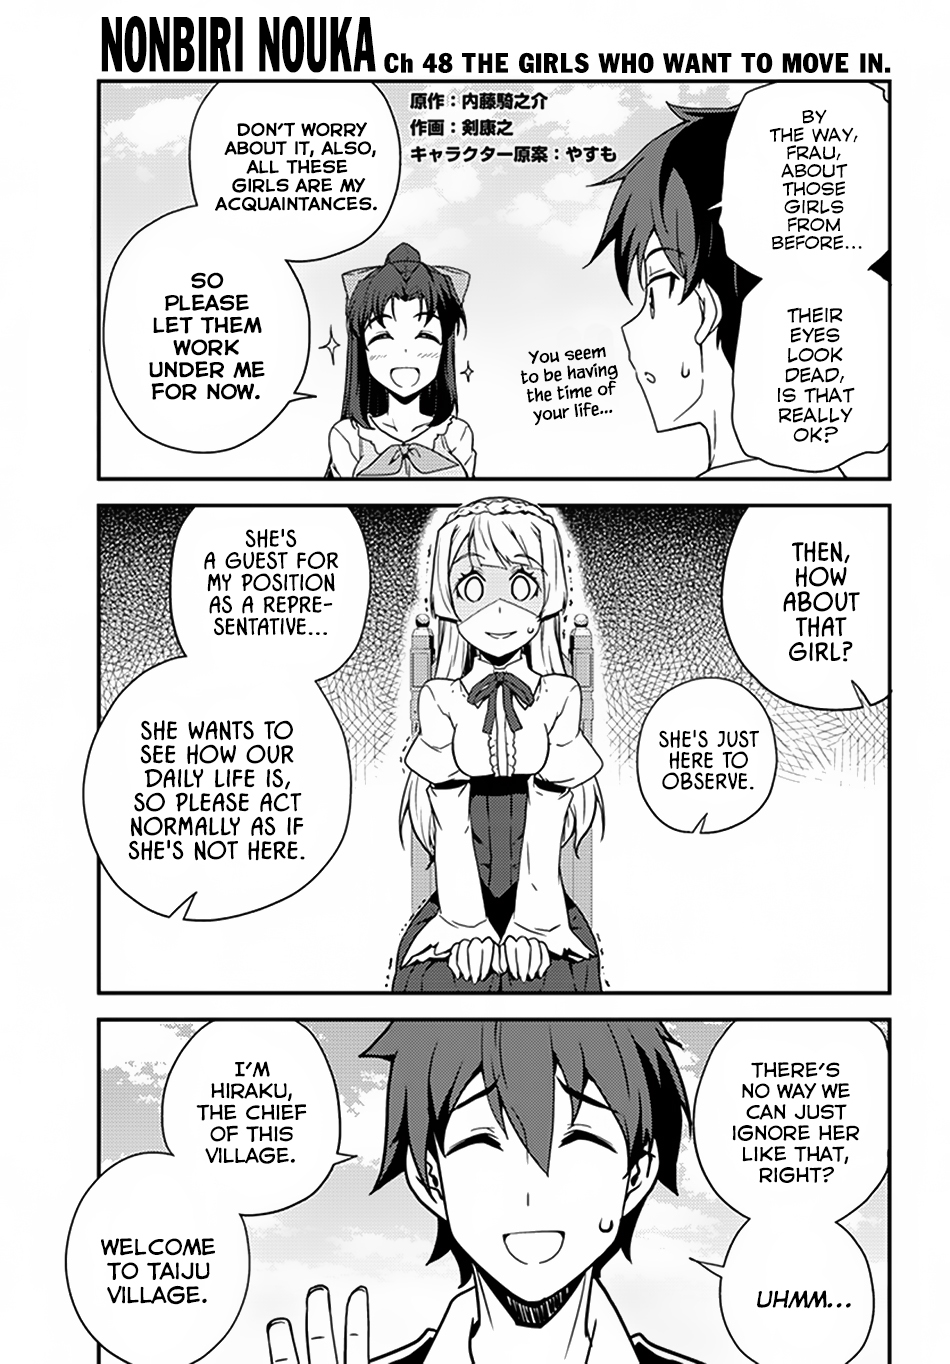 Isekai Nonbiri Nouka Ch. 48 The Girls who want to move in.